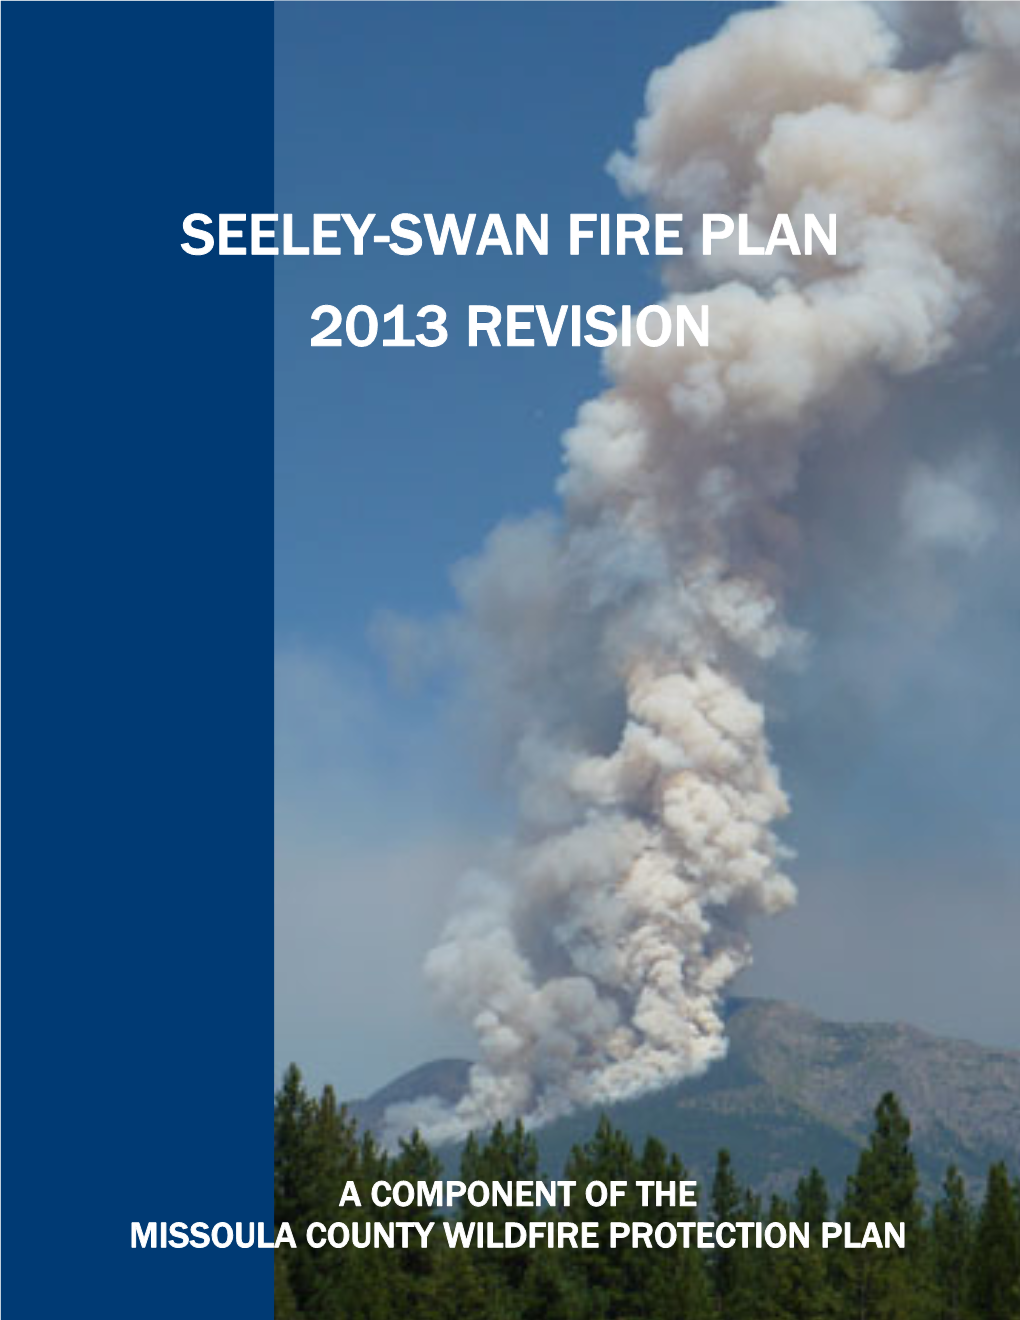 Seeley-Swan Fire Plan 2013 Revision